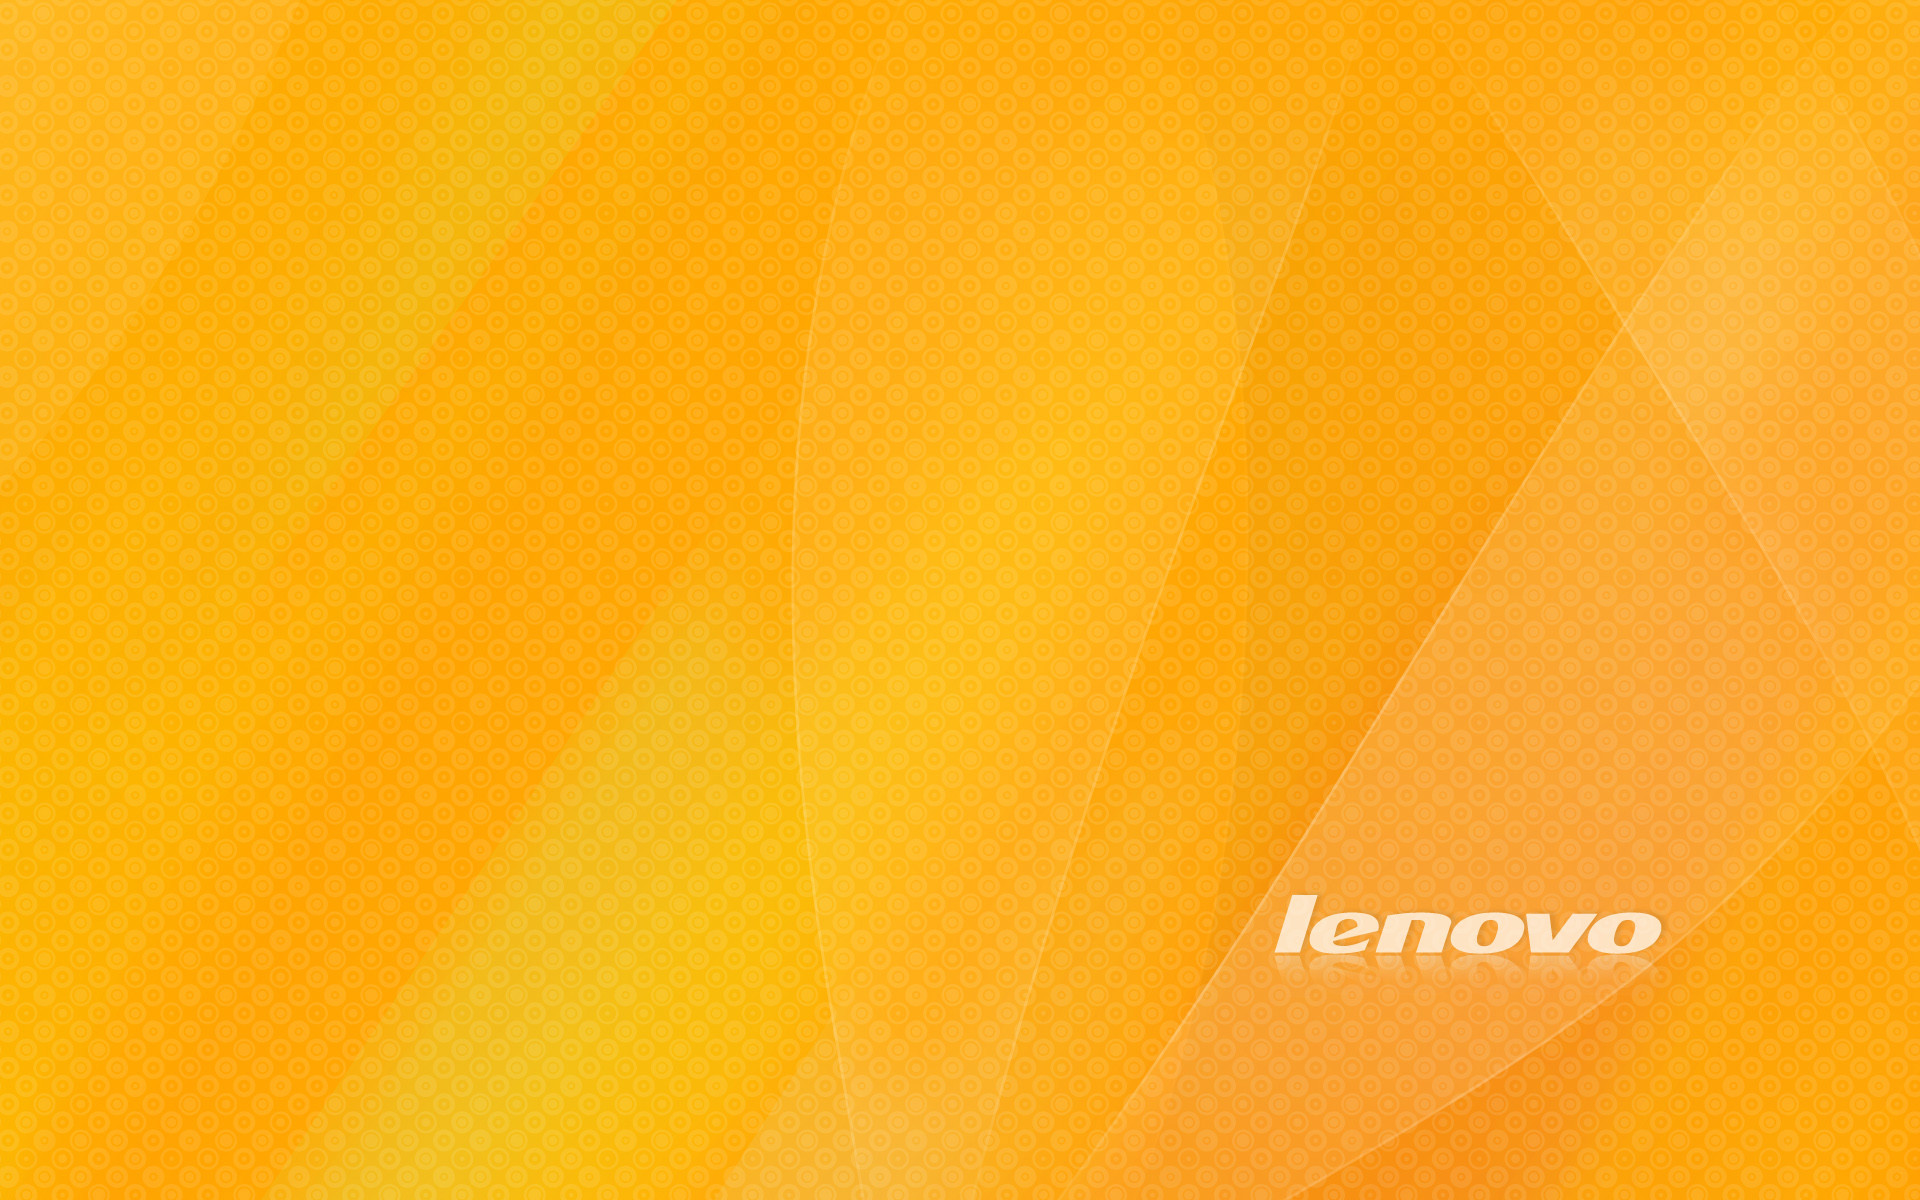 Magnificent Lenovo Wallpaper Full HD Pictures